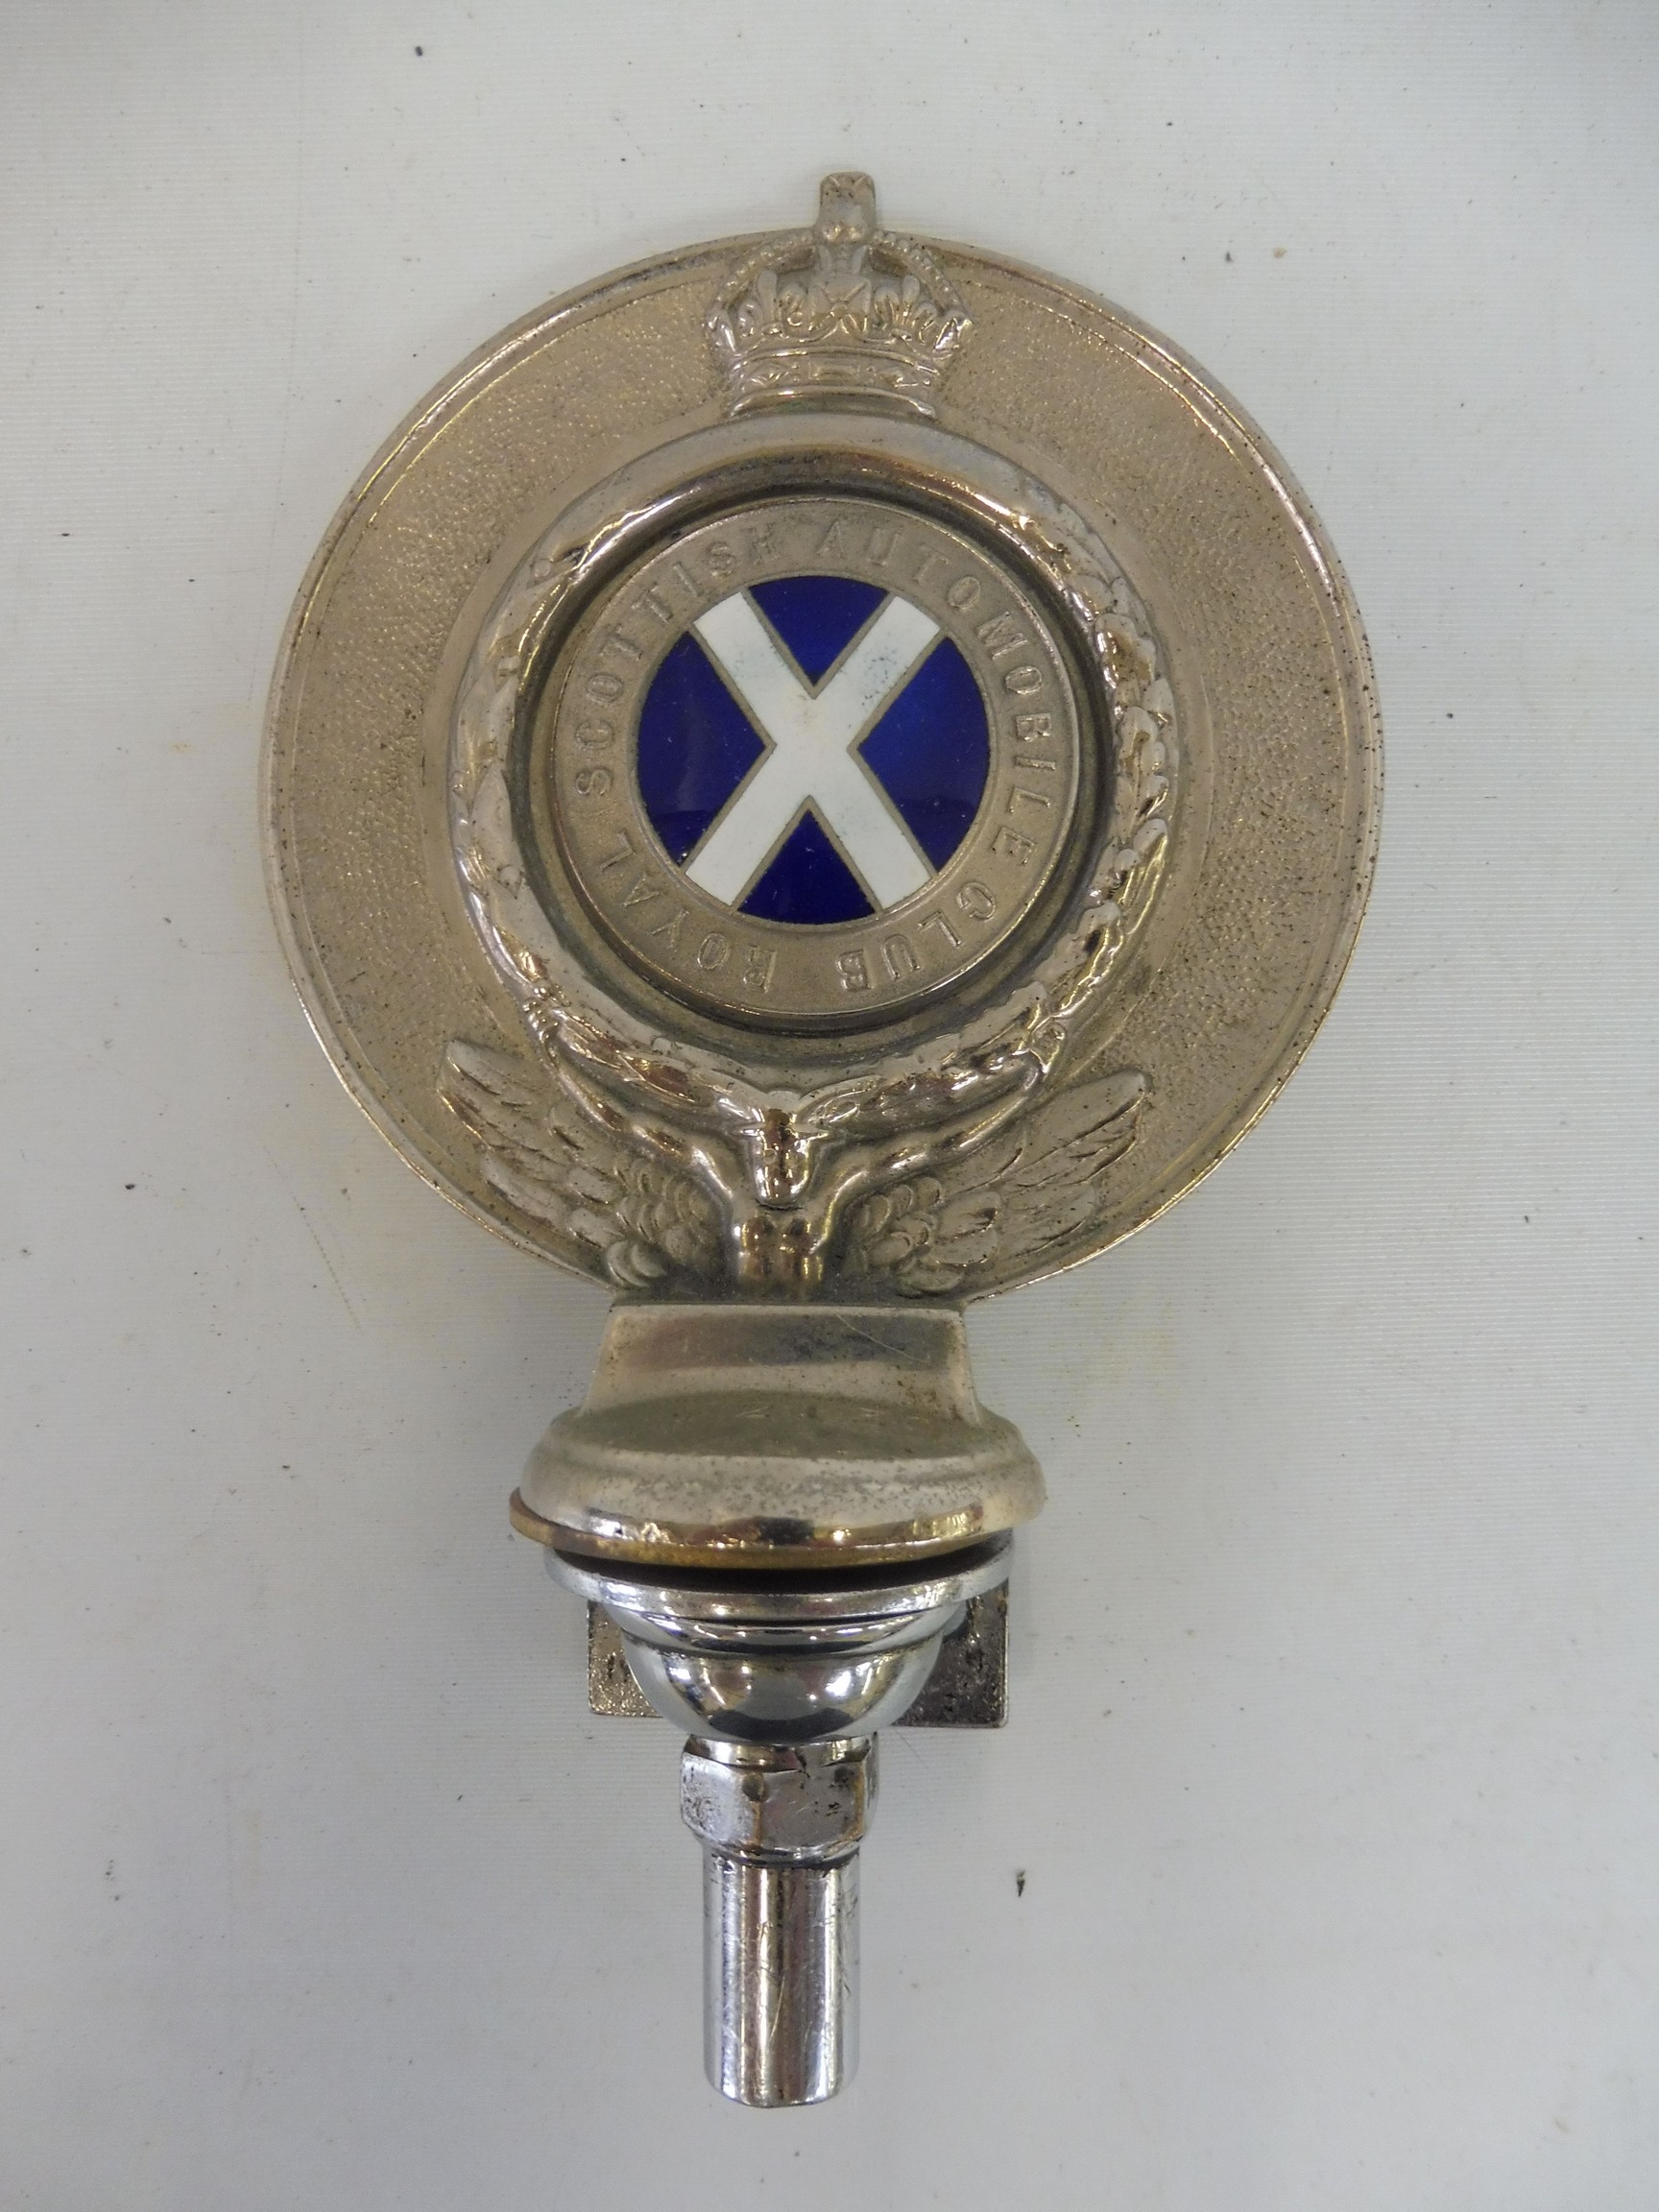 A Royal Scottish Automobile Club RAC Associate Club badge, unusually without any wording or laurel